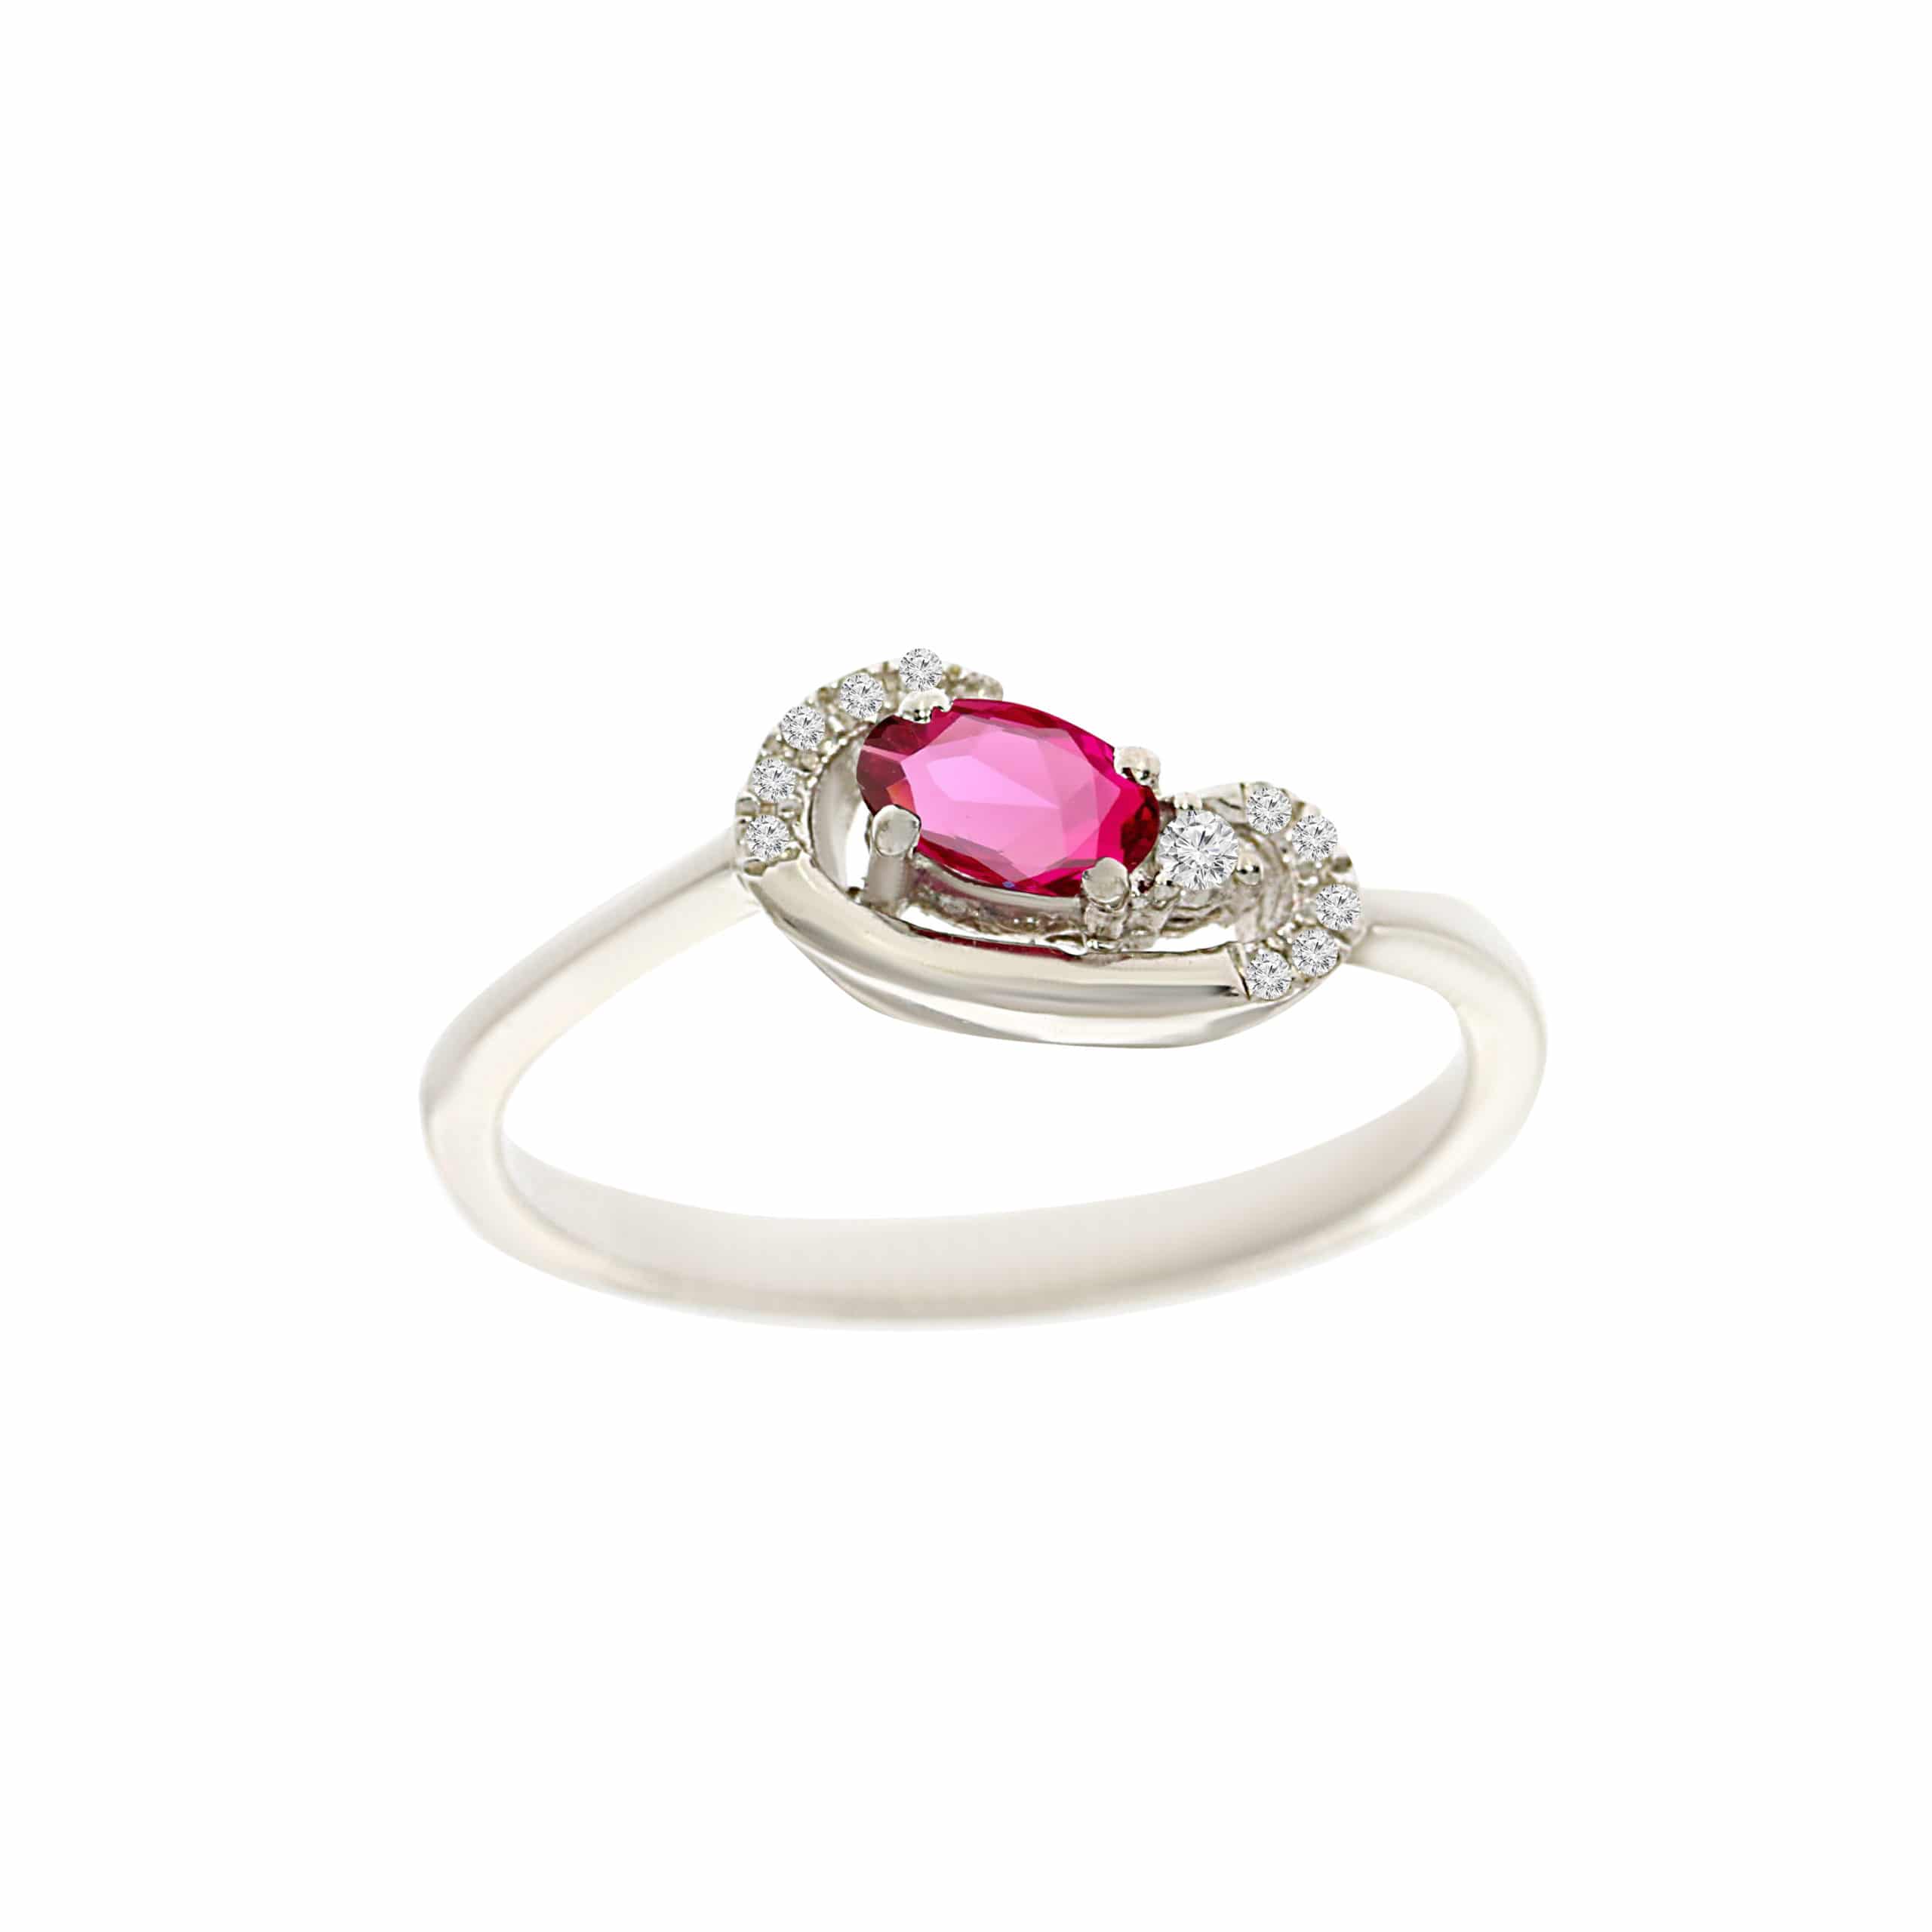 0.25ct Ruby and Diamonds Ring, 14K White Gold